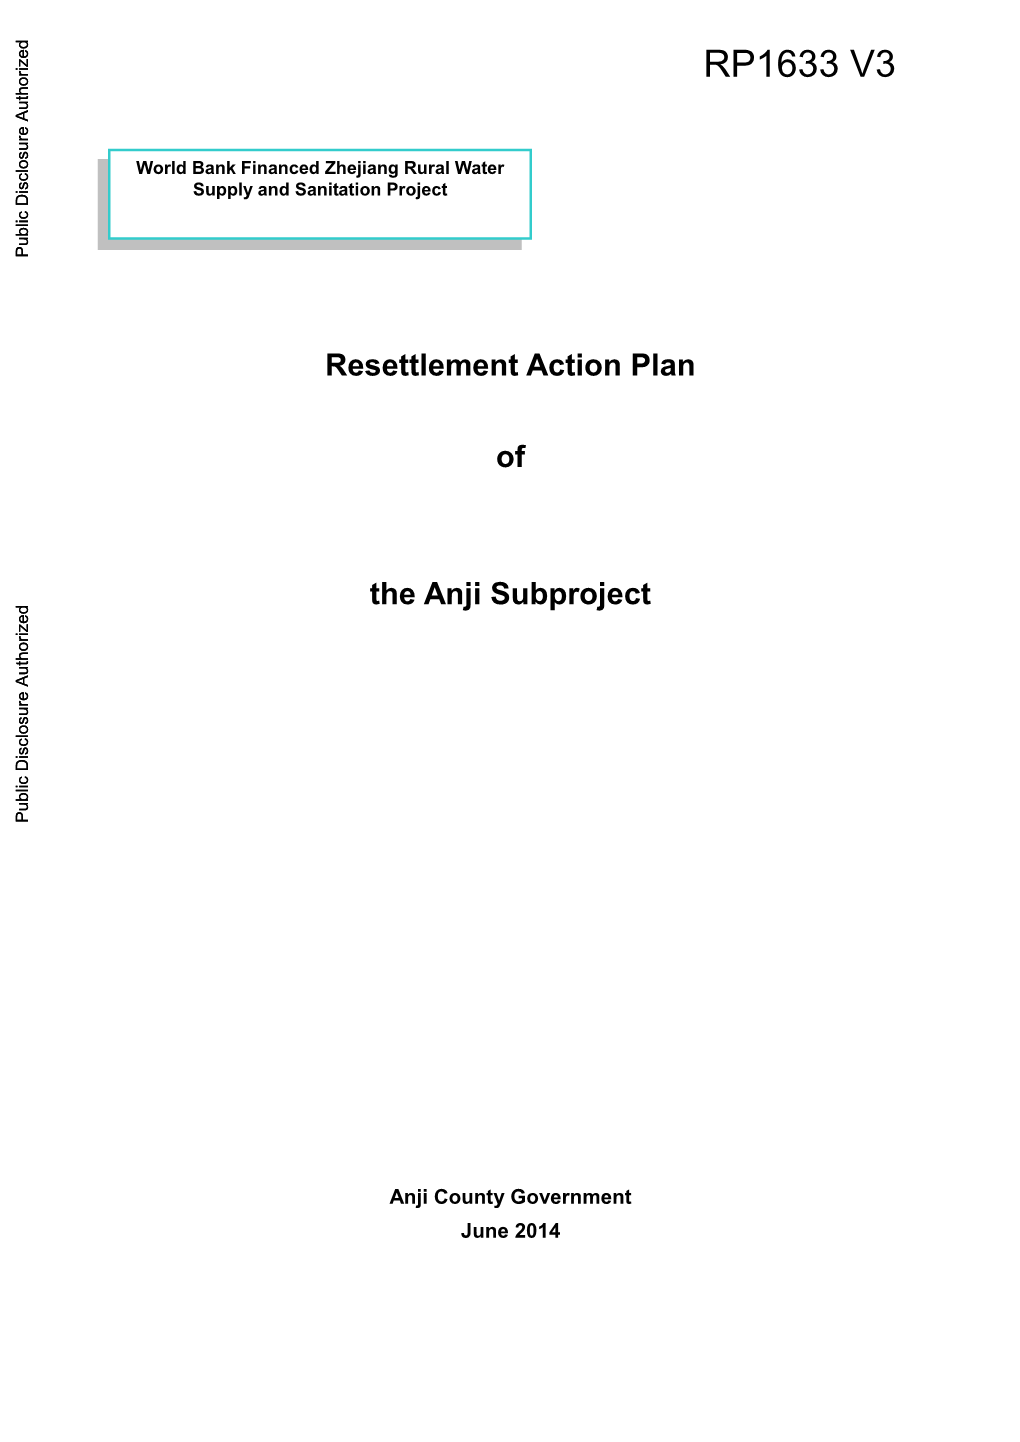 Resettlement Action Plan of the Anji Subproject